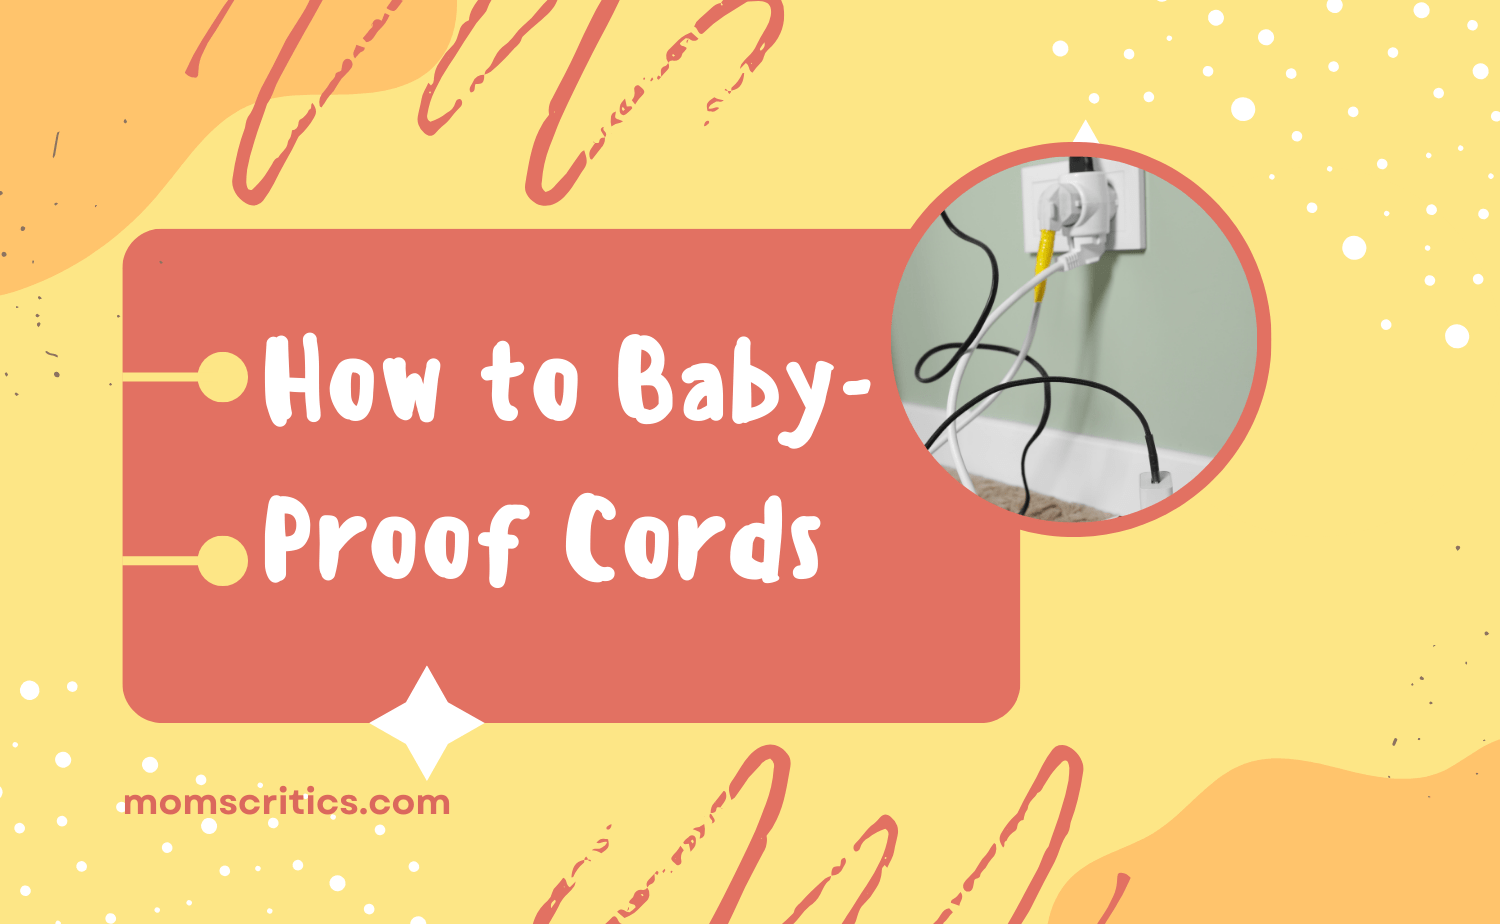 how to baby proof cords